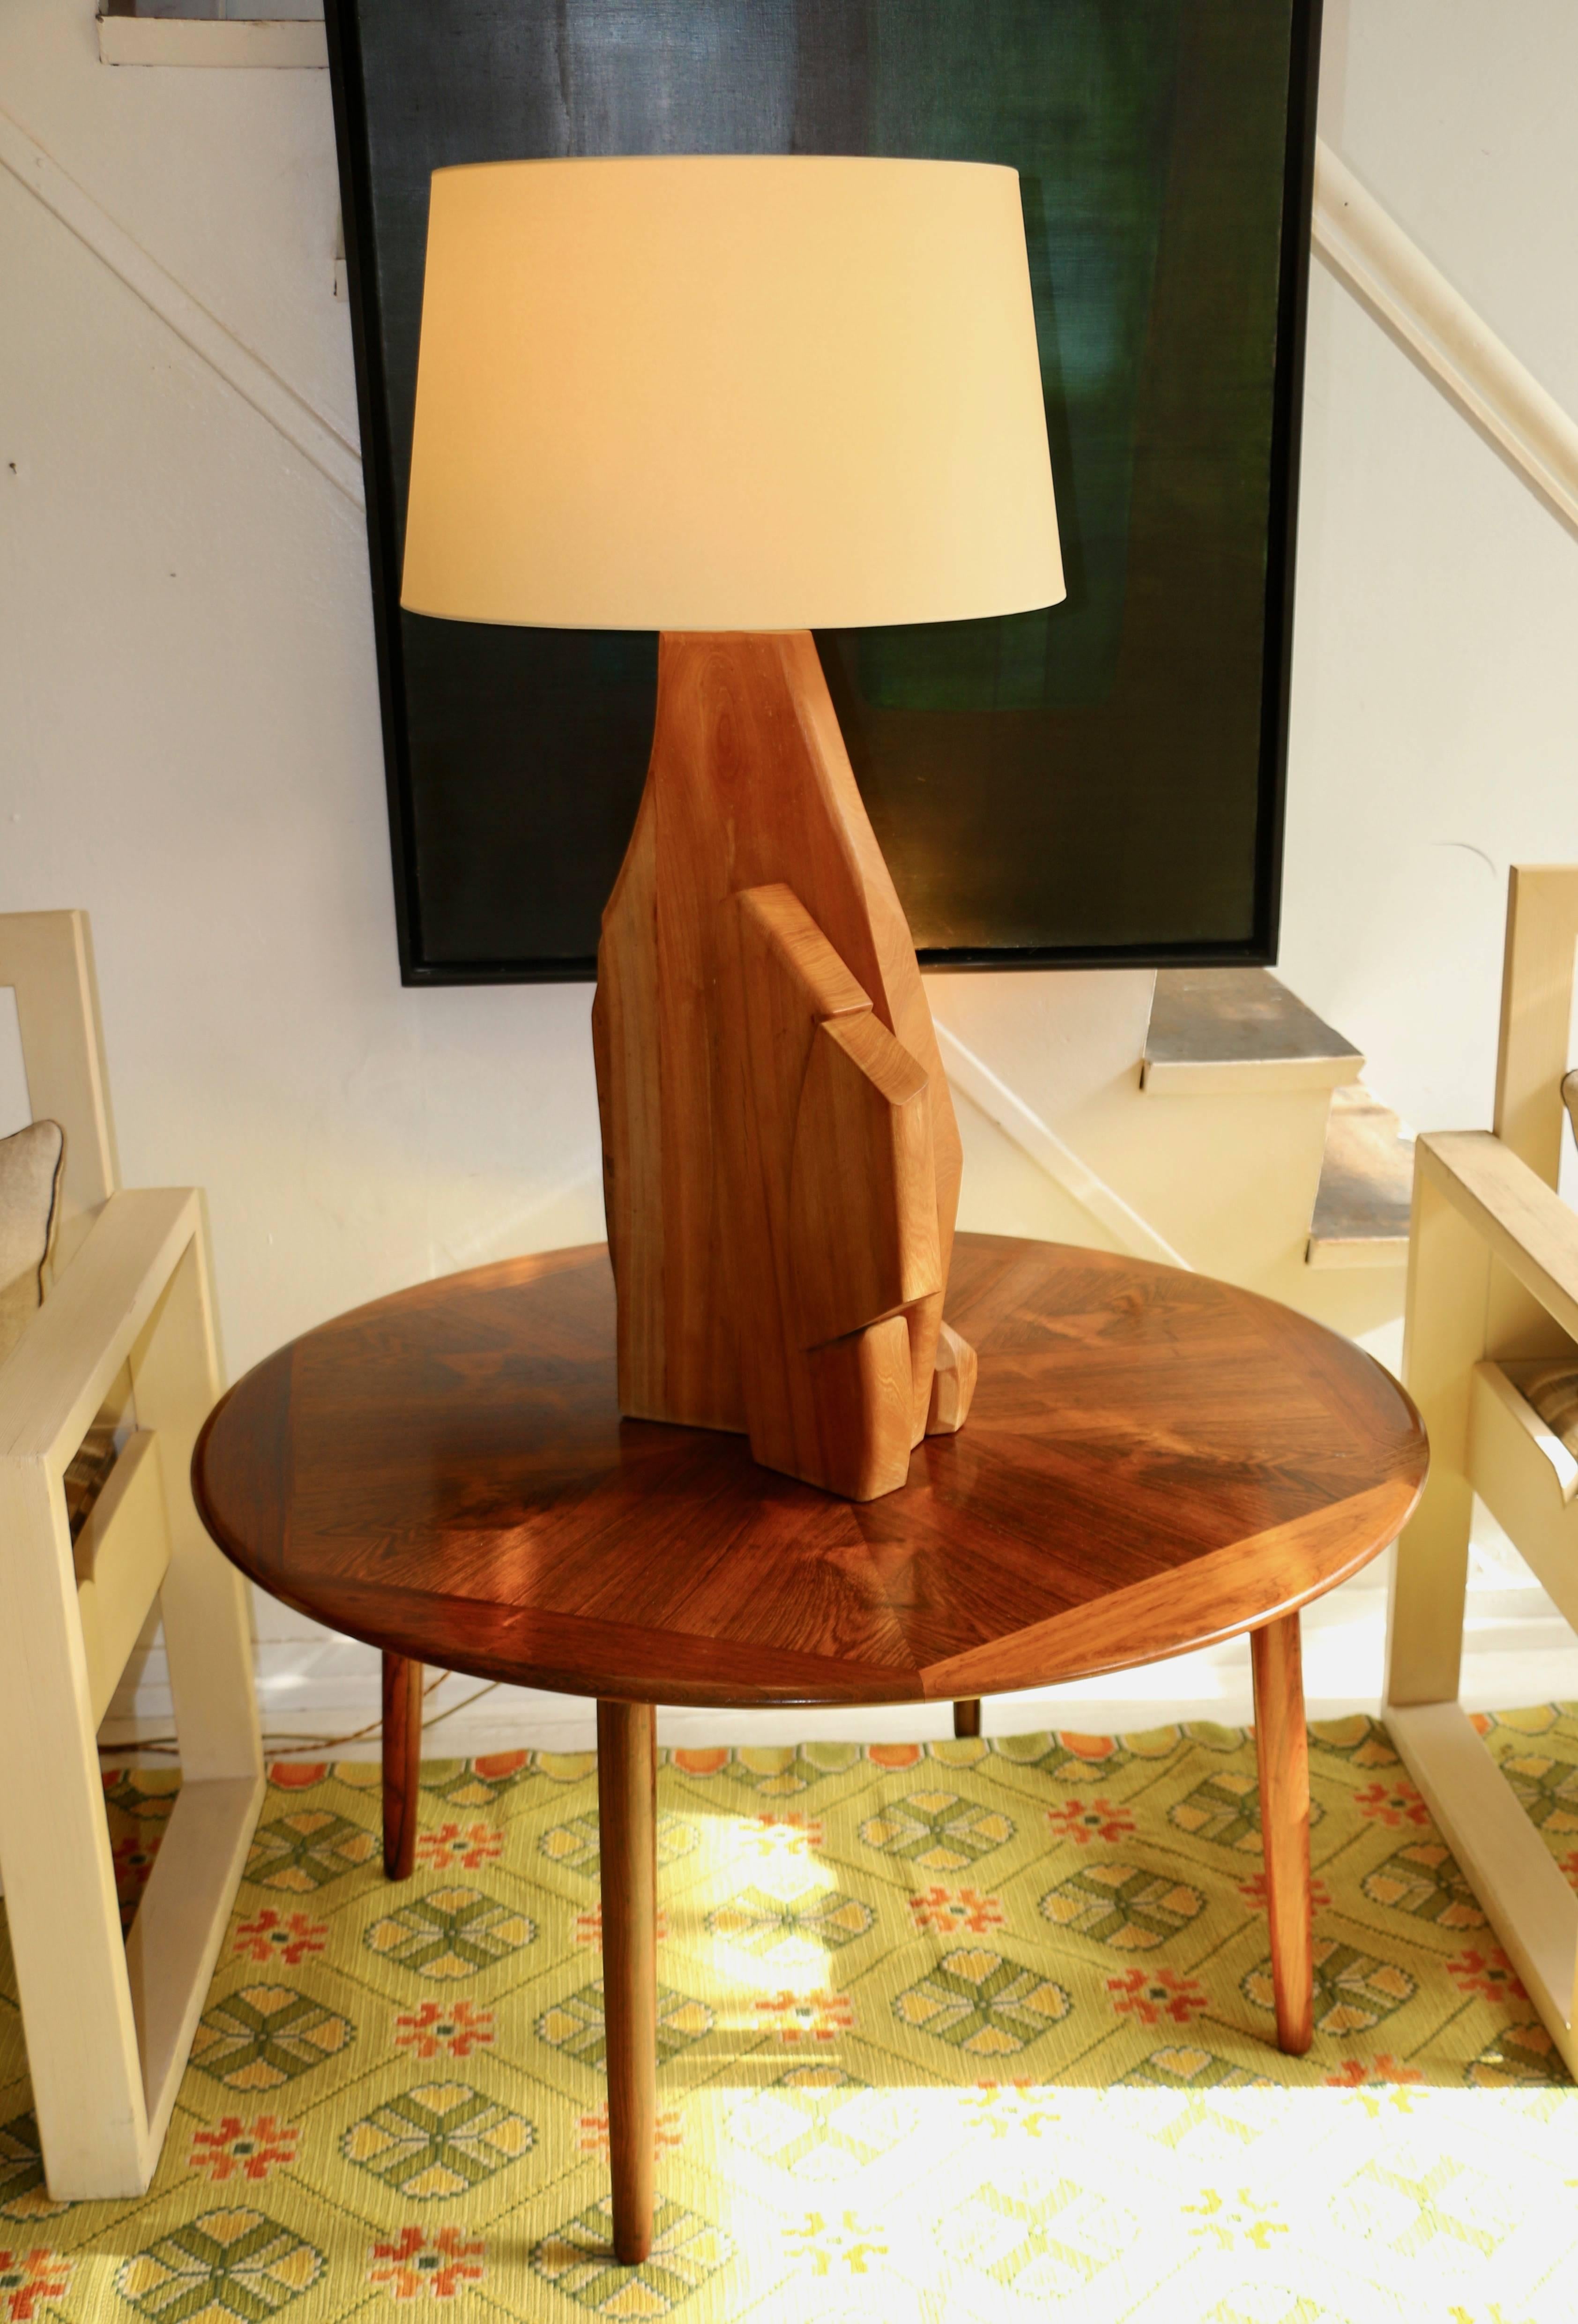 Large Wood Sculpture Table Lamp 3